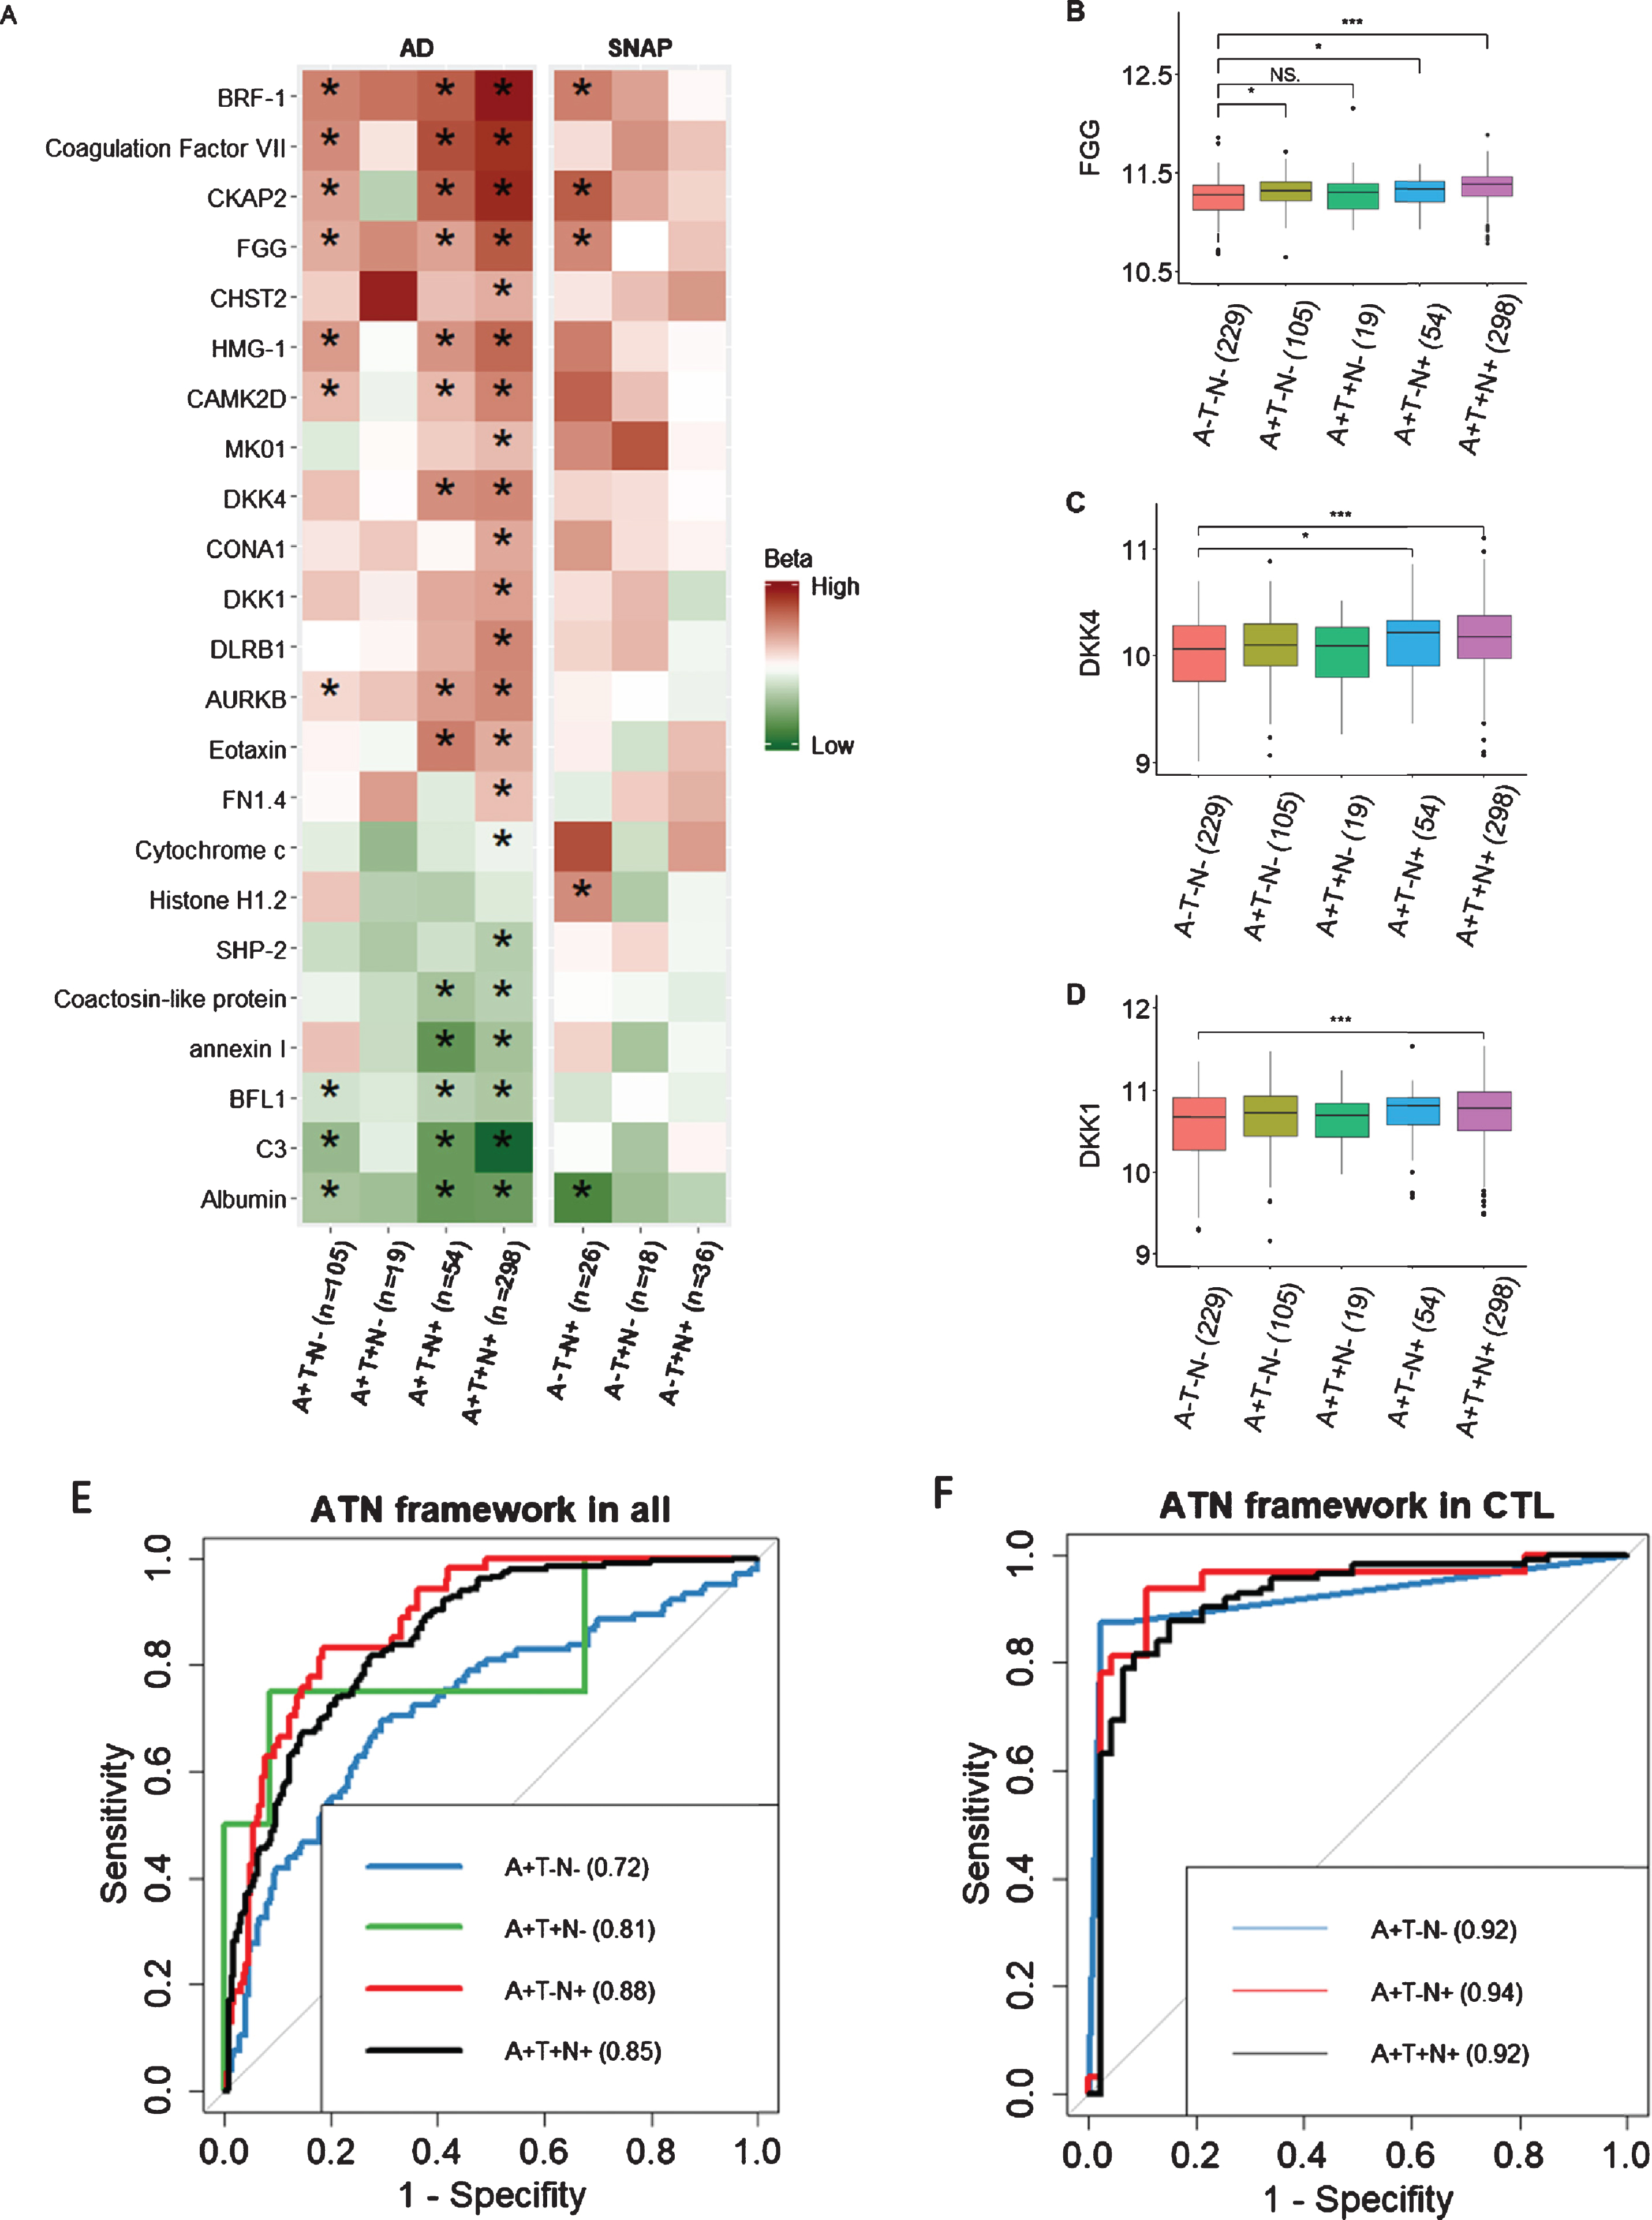 A) Association of 23 DKK1-induced signature with 7 ATN profiles compared to A–T–N–. B–D) Comparison of proteins between A–T–N–(n = 229) and amyloid-positive individuals including A + T–N–(n = 105), A + T + N–(n = 19), A + T–N+ (n = 54), and A + T + N+ (n = 289). E, F) AUC of using proteins along with age and APOE ɛ4 genotype to differentiate A–T–N–from amyloid-positive individuals in all individuals and healthy controls respectively. High and low beta indicate positive and negative coefficients respectively. SNAP, Suspected Non-Alzheimer Pathology; FGG, fibrinogen gamma chain. In B, C, and D, Y axis represents the log transformed of proteins expression abundance measured by Somascan assay. *p < 0.05; ***p < 0.001; NS., not significant; AUC, area under the curve; CTL, controls.